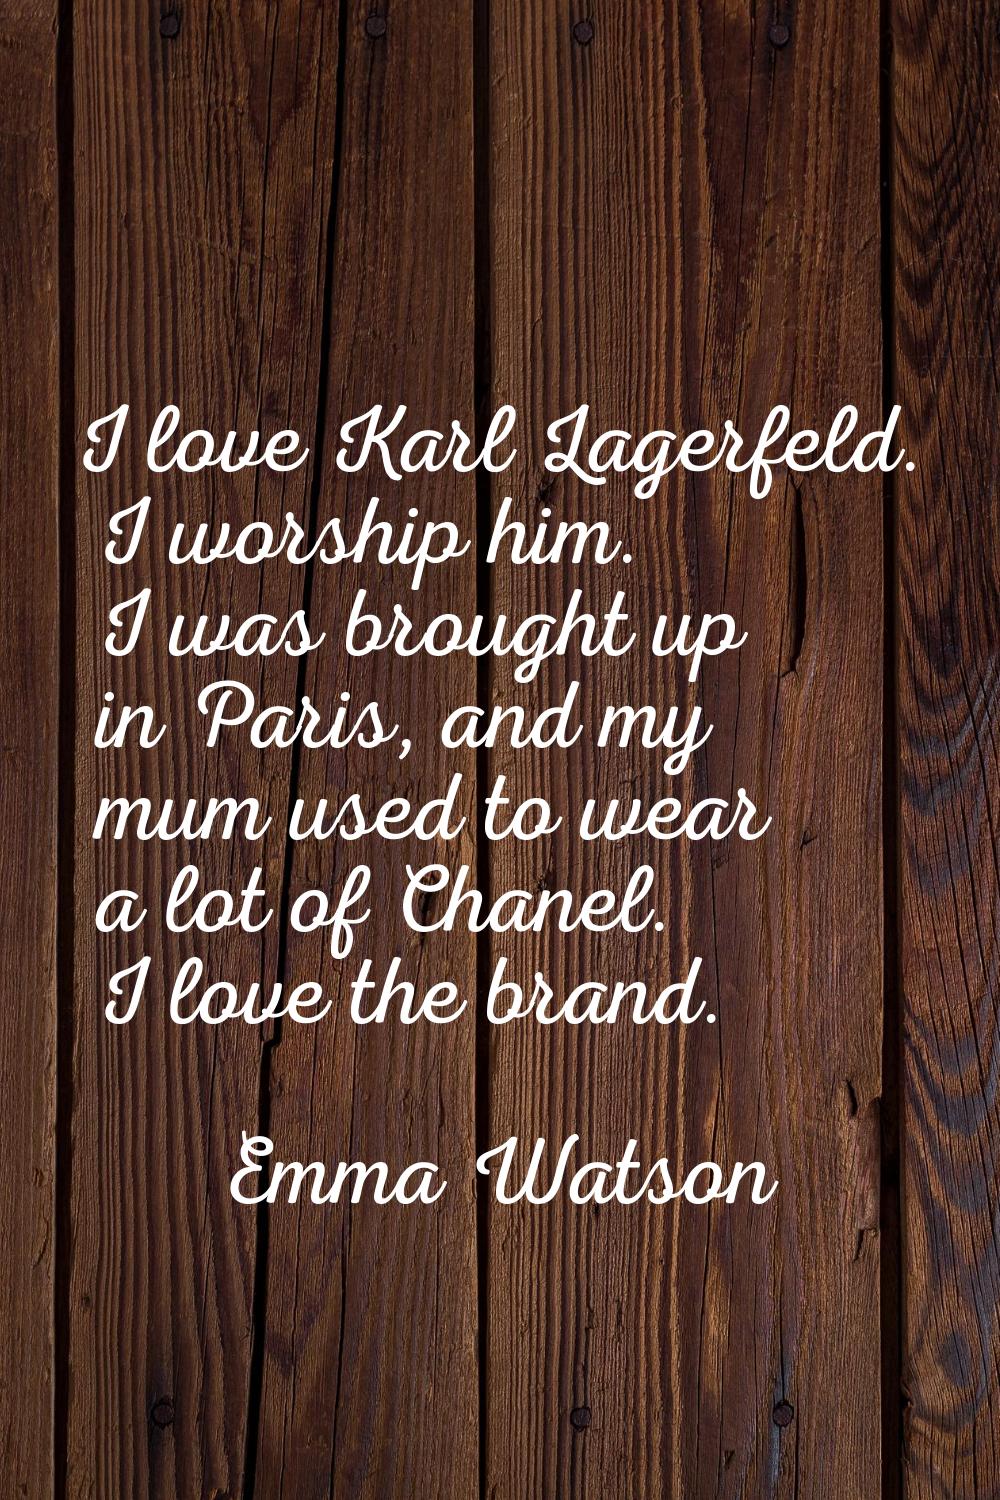 I love Karl Lagerfeld. I worship him. I was brought up in Paris, and my mum used to wear a lot of C